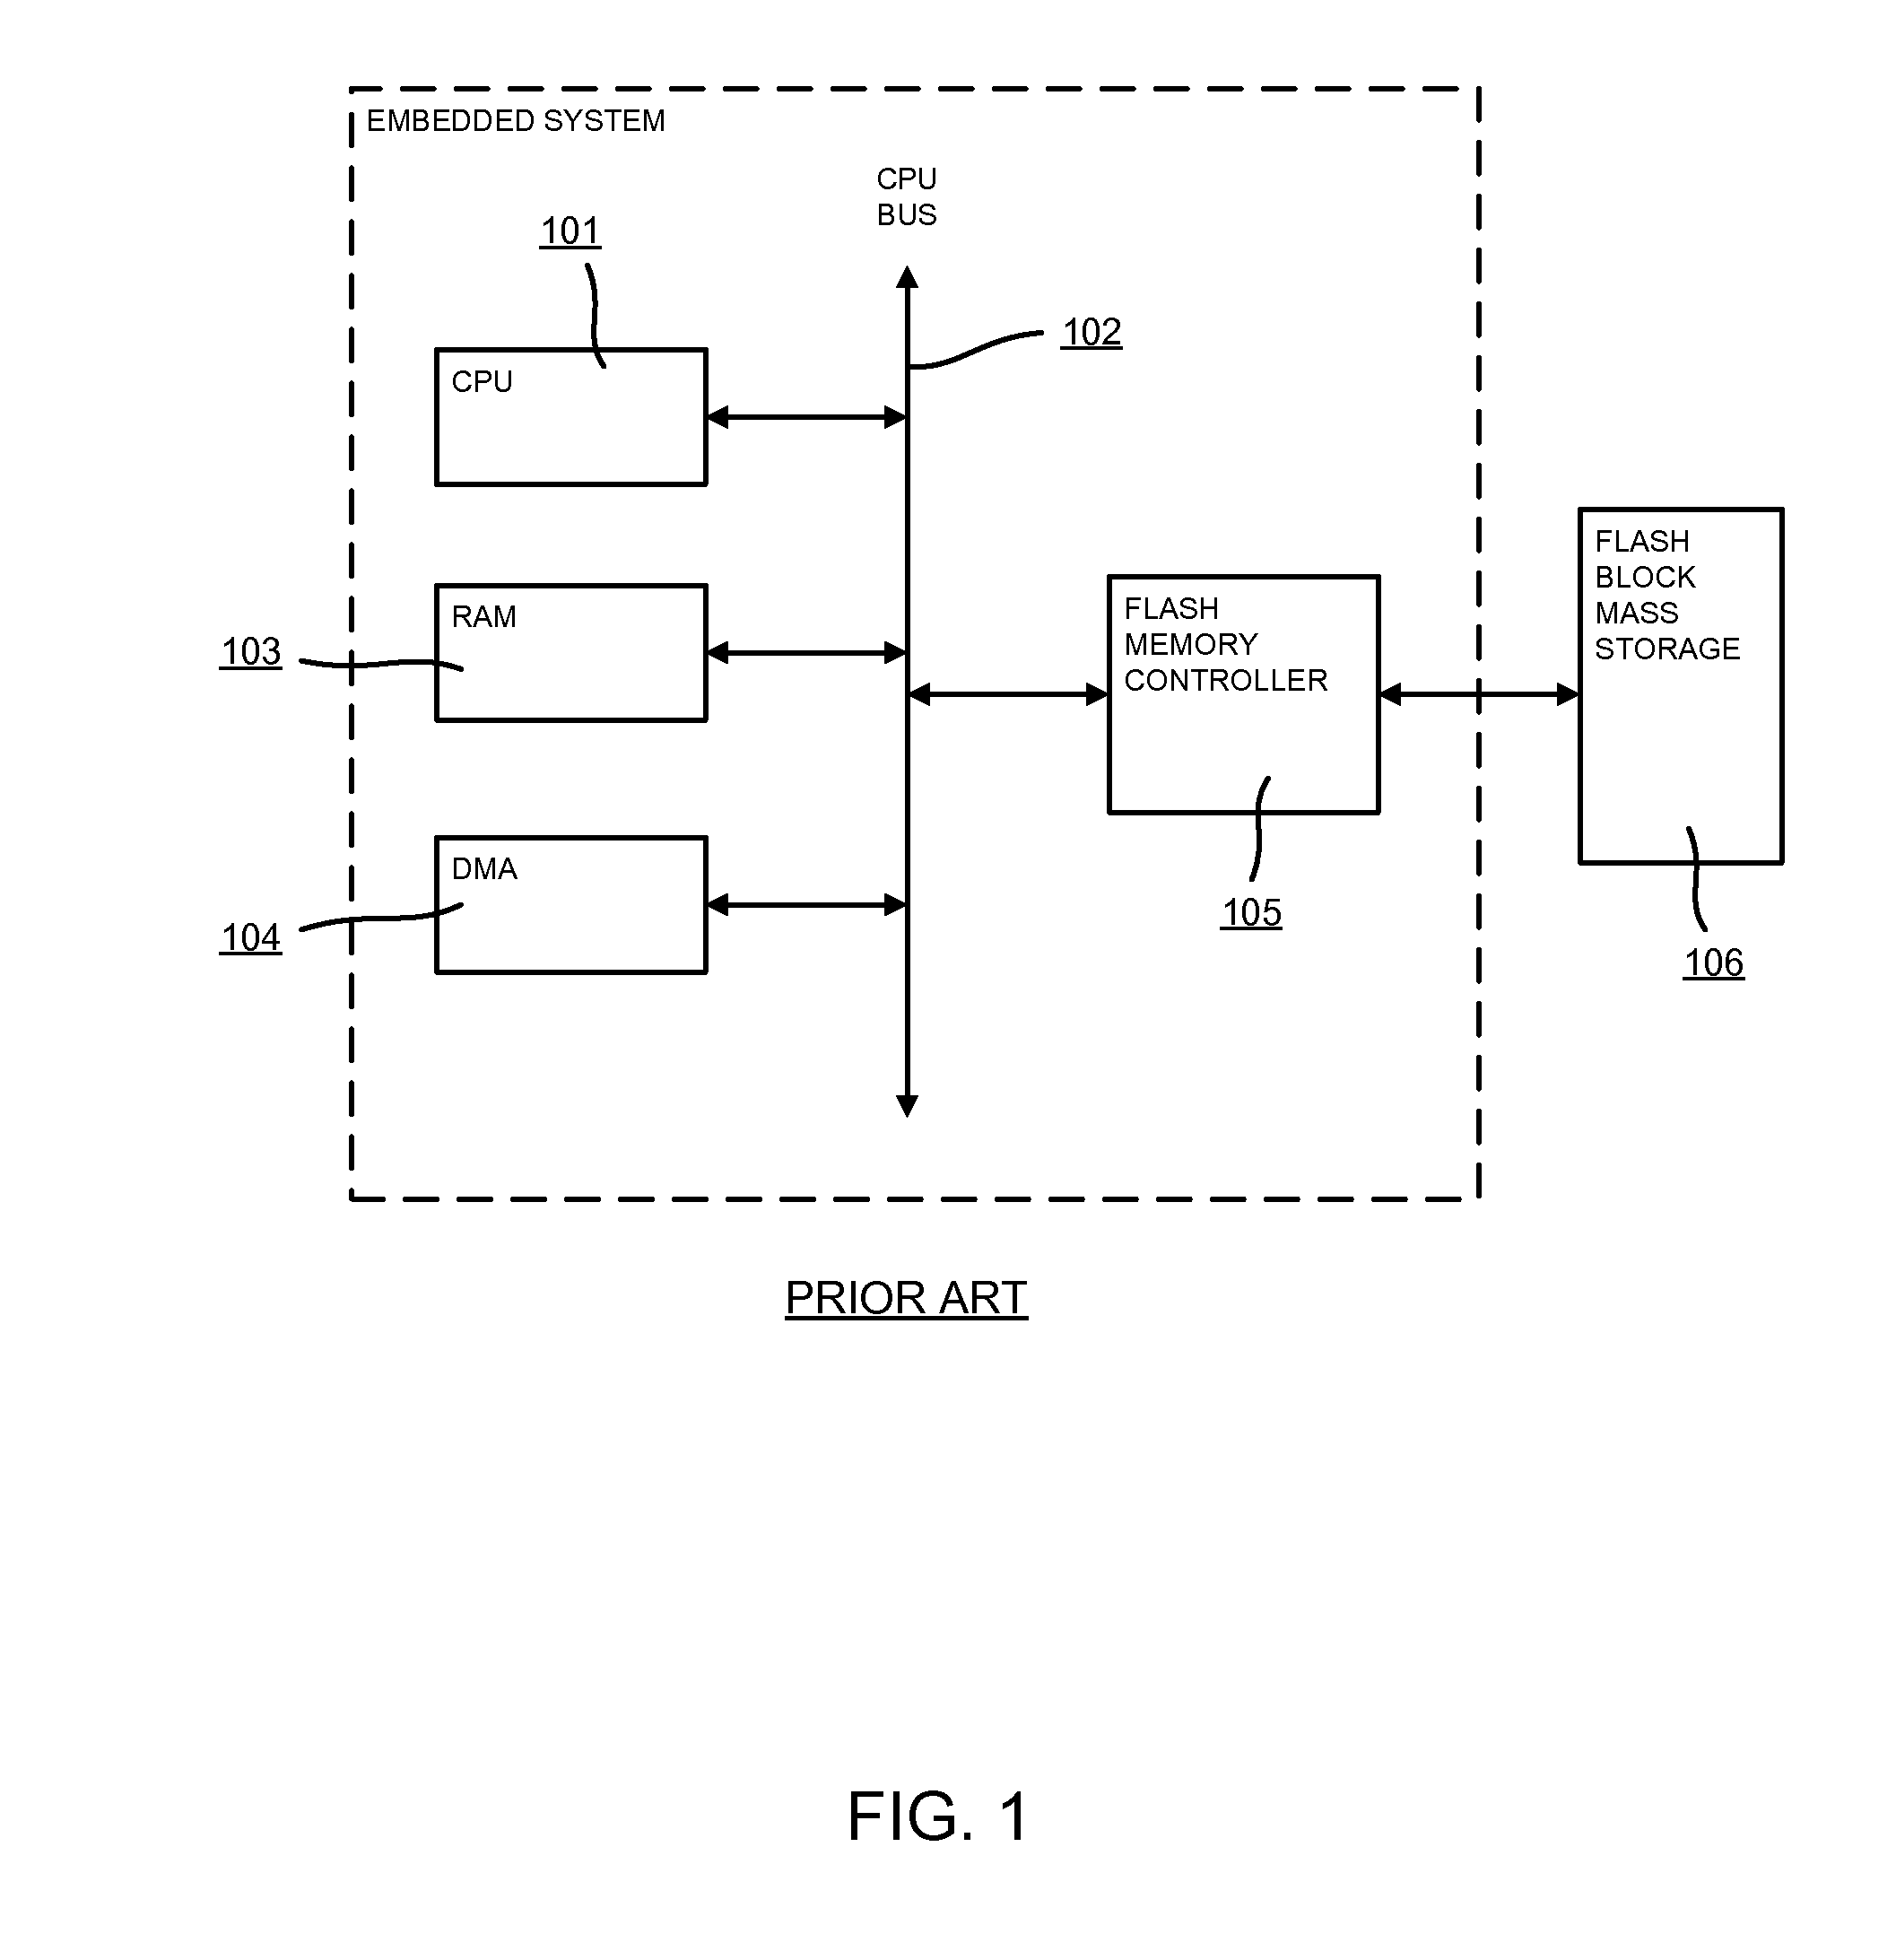 Embedded system boot from a storage device